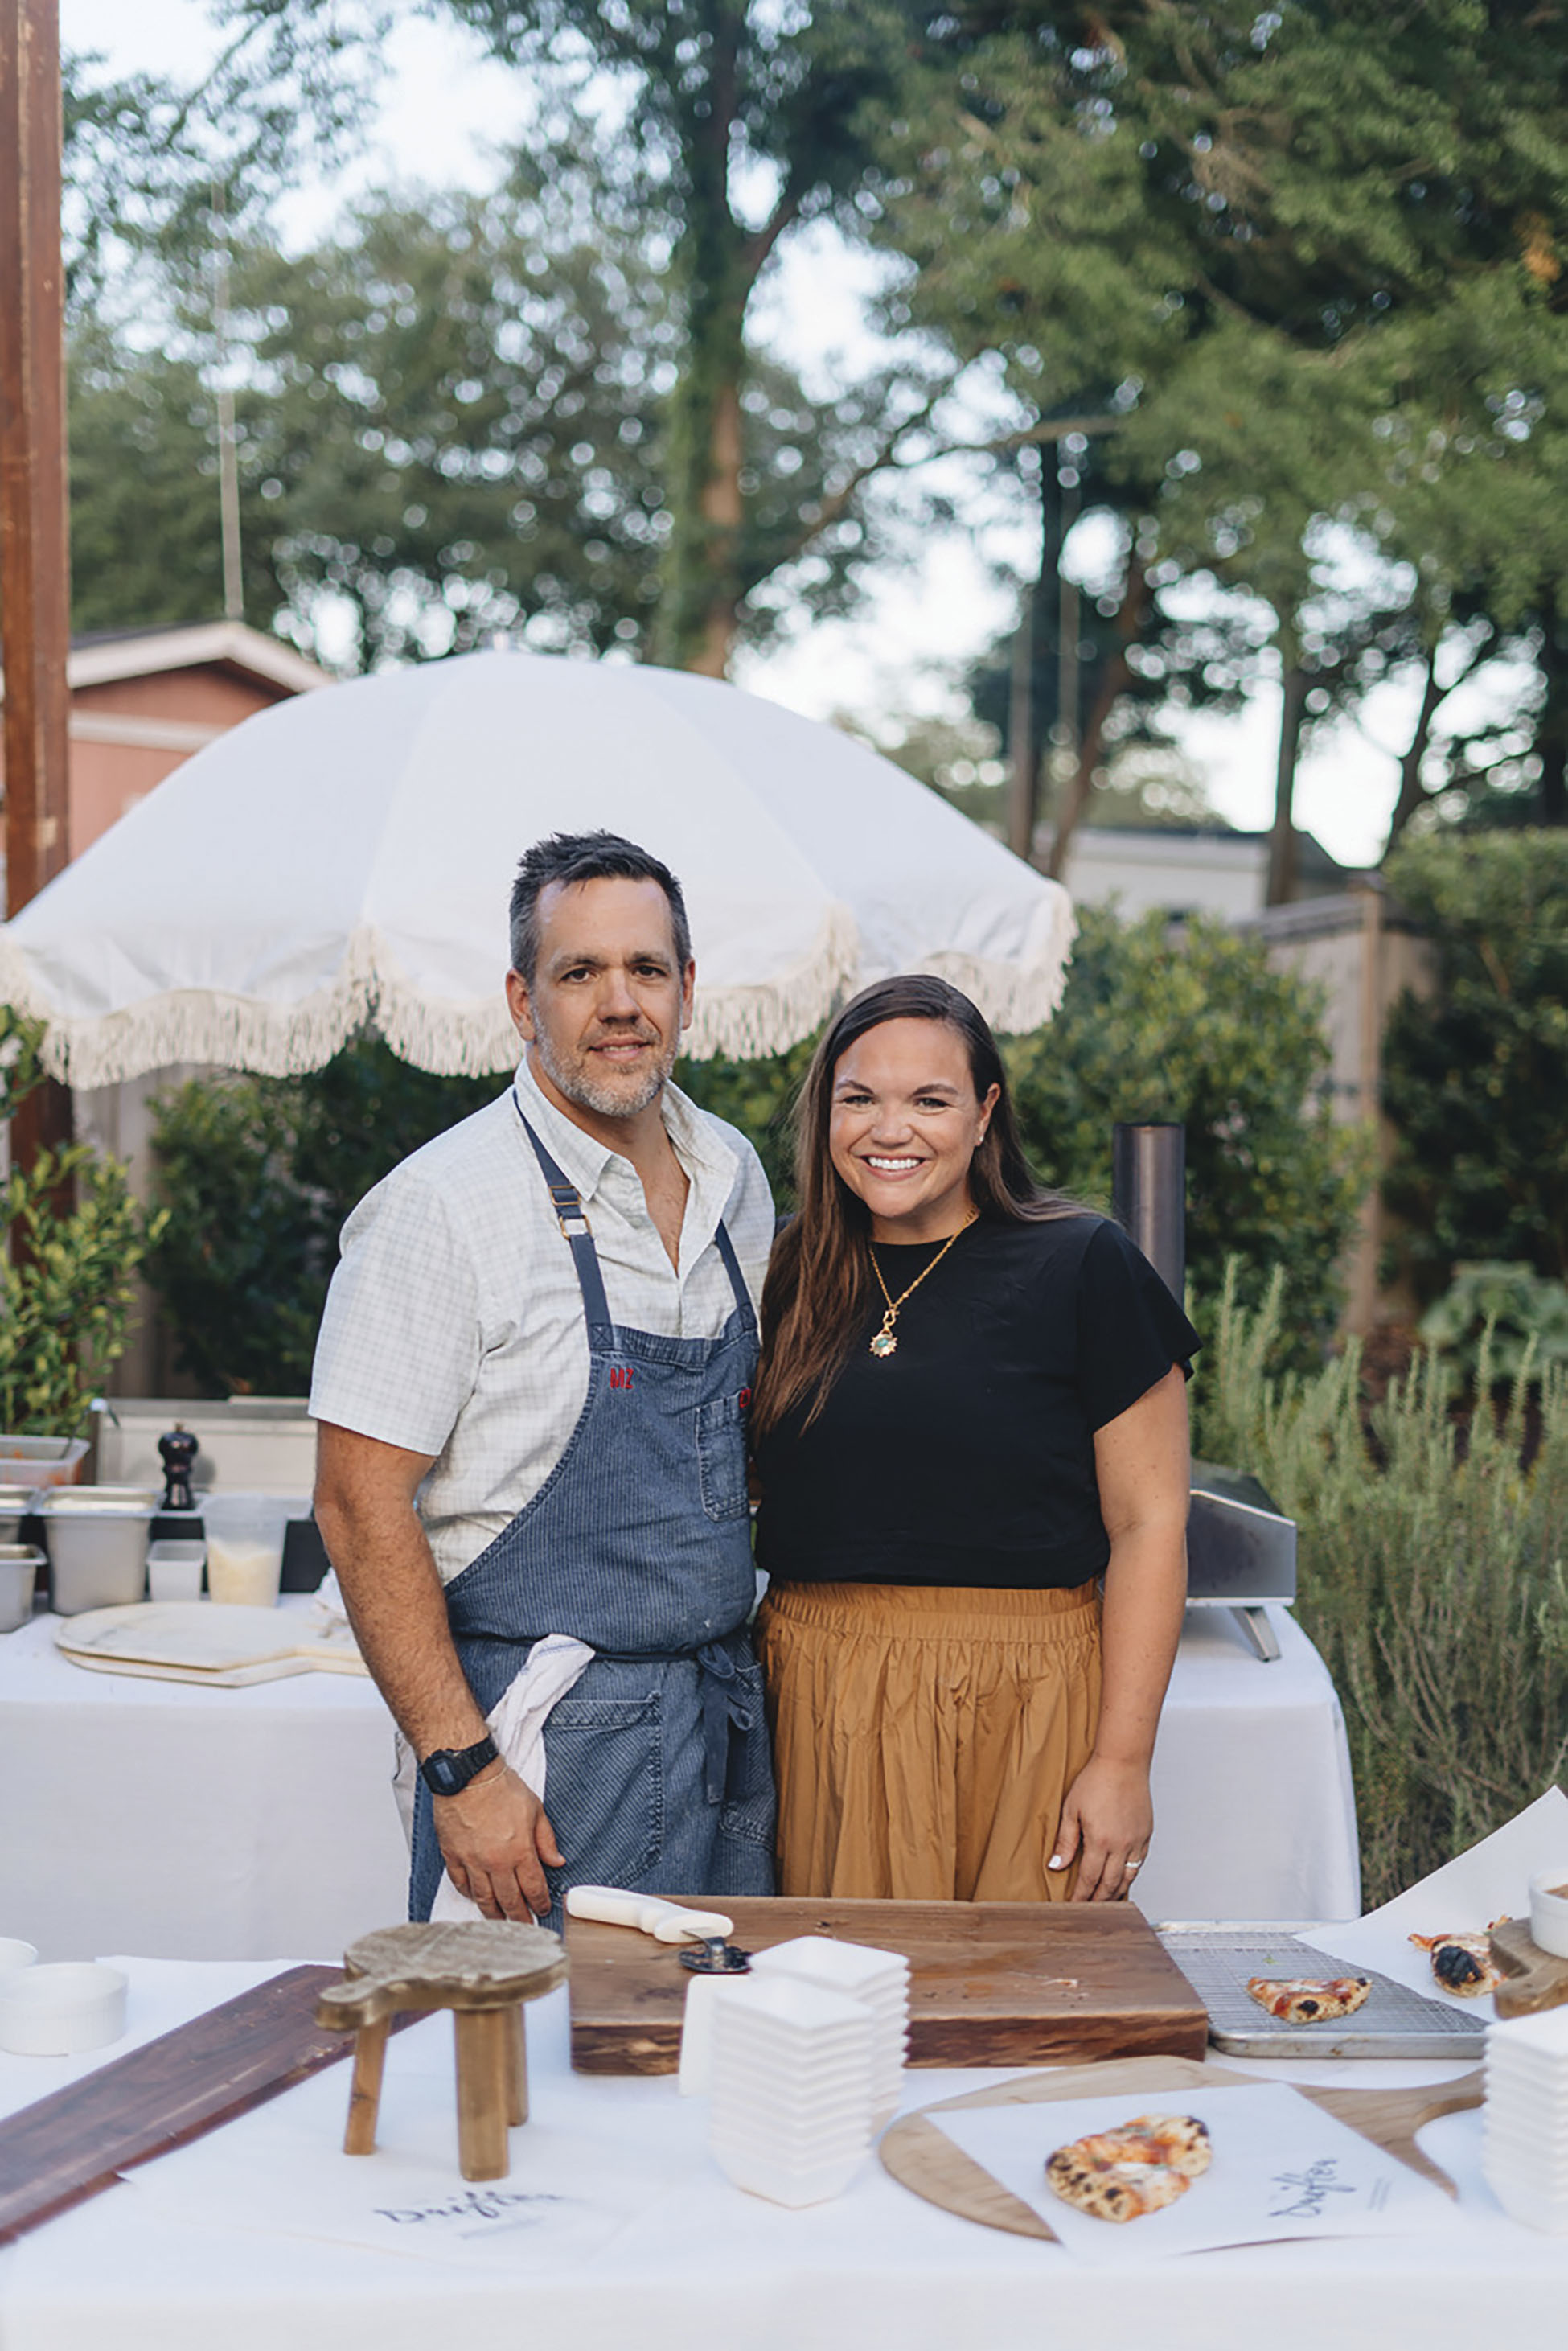 Husband-and-wife team Michael and Courtney Zentner place an emphasis on sourcing local, from menu items to tableware.